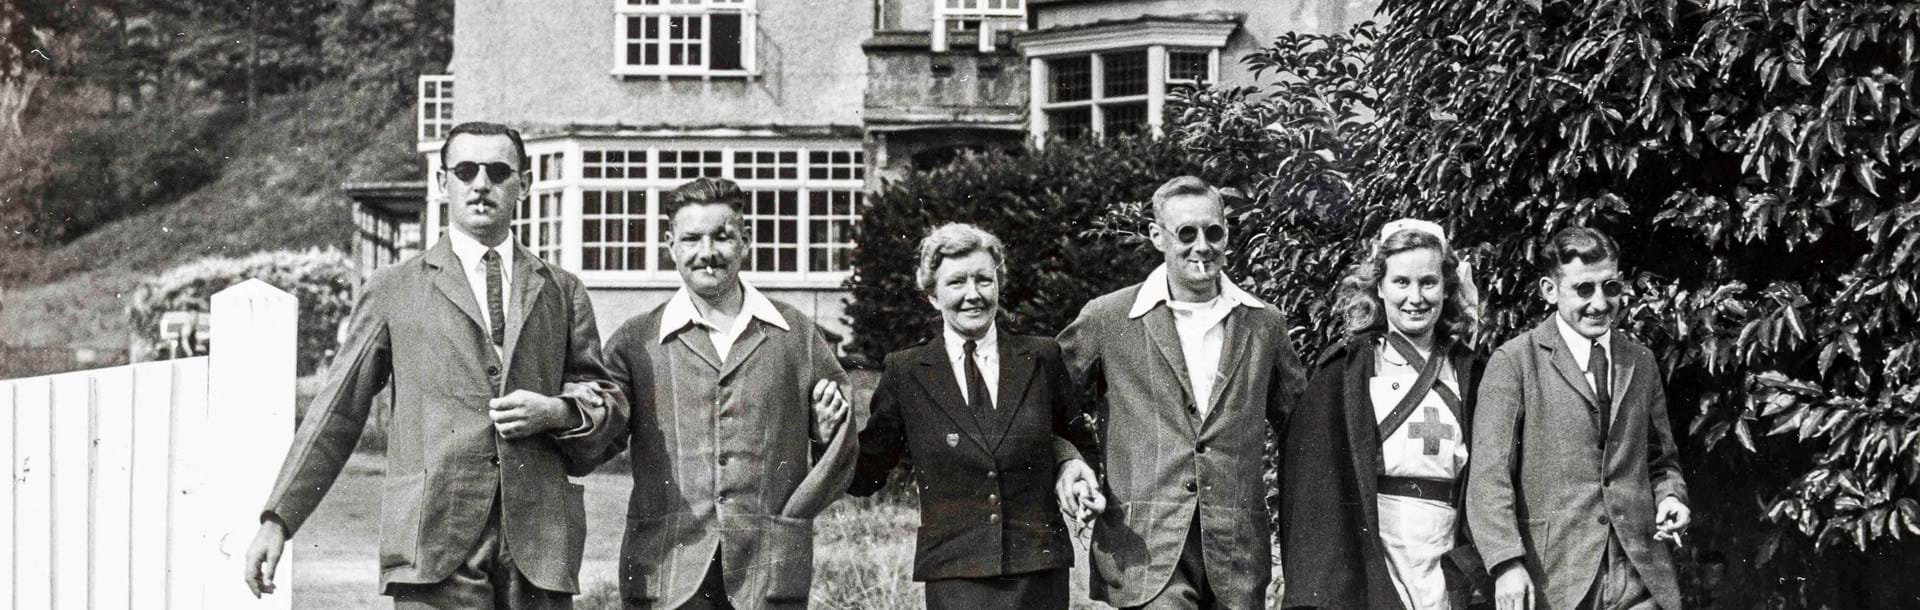 Four blind veterans accompanied by two nurses going for a walk at Church Stretton during World War II